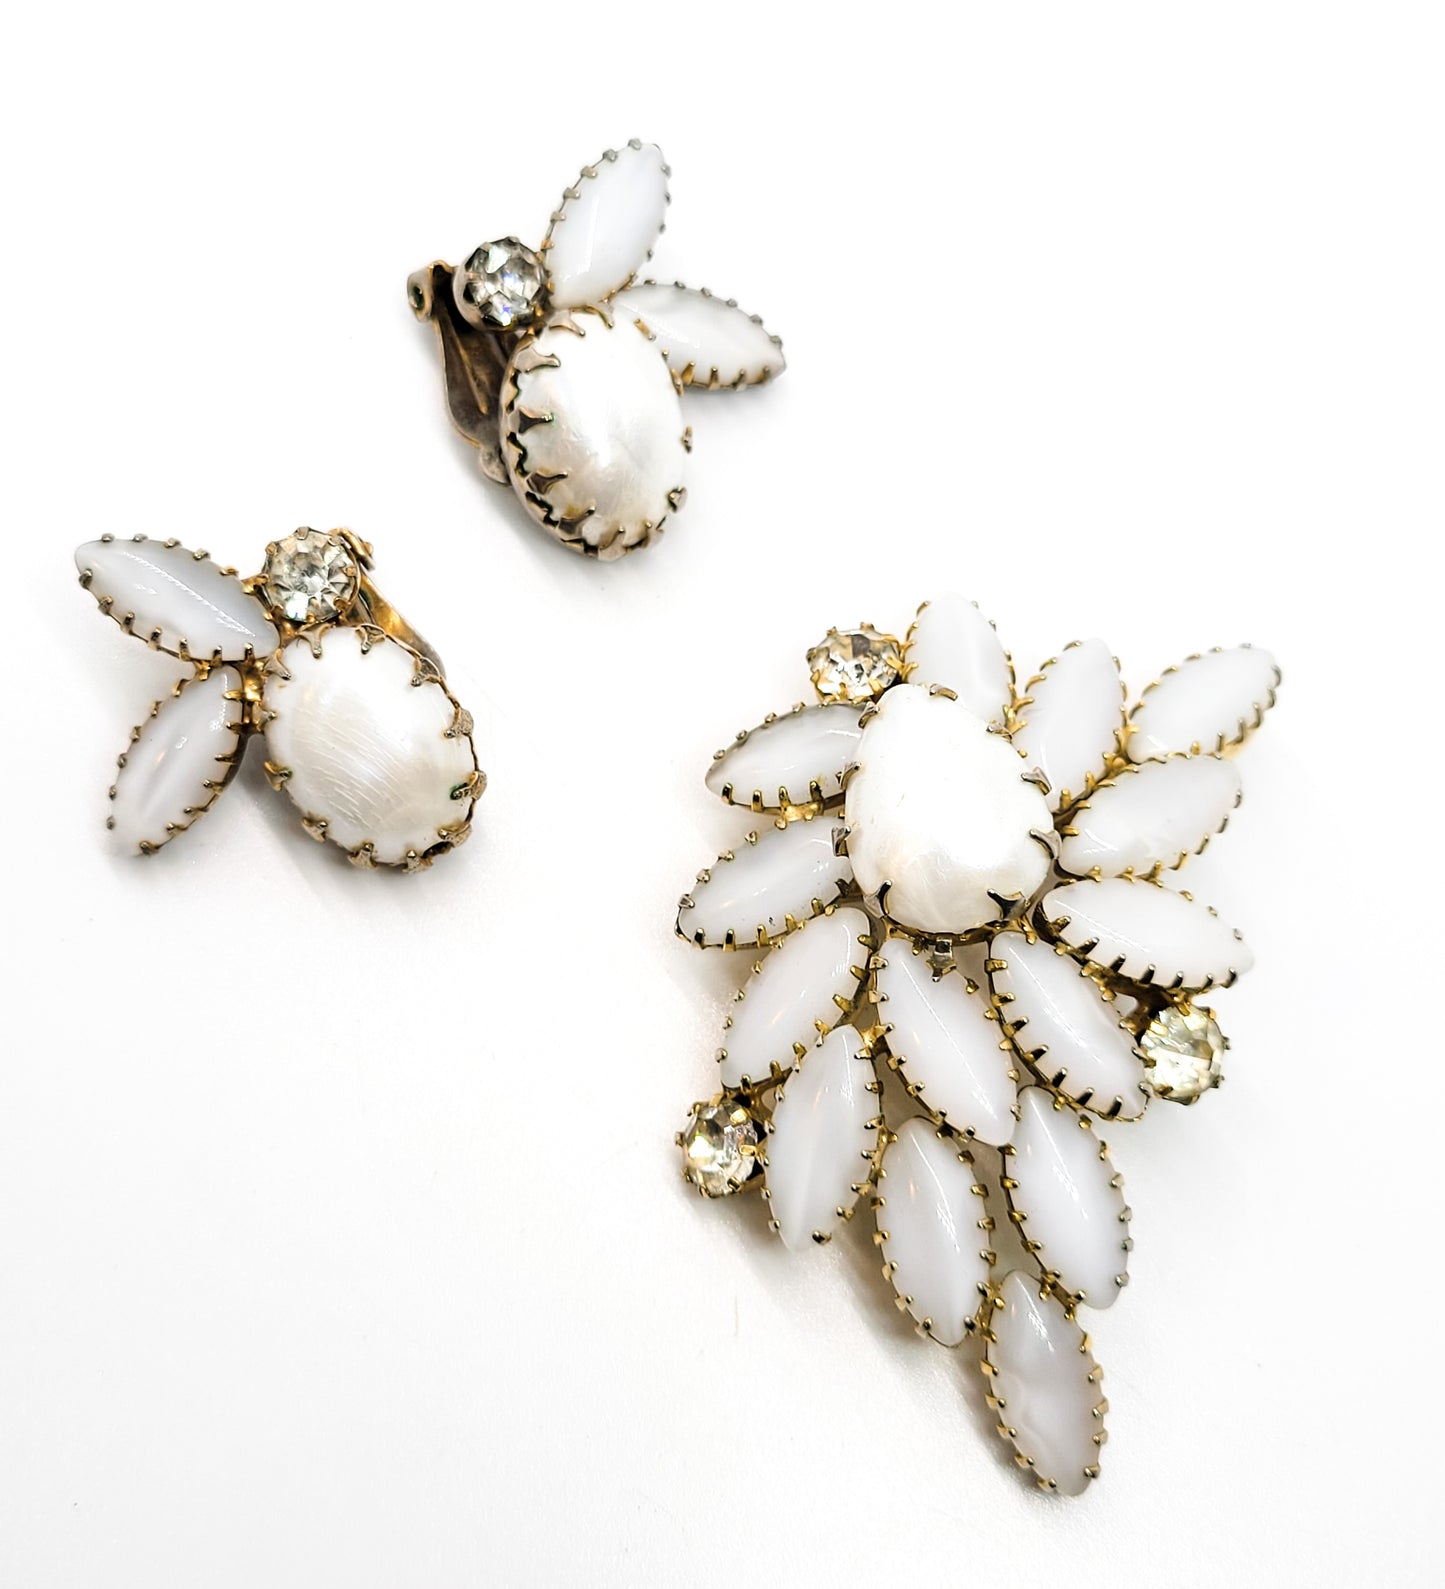 White cat's eye and faux pearl prong set vintage brooch and earrings set